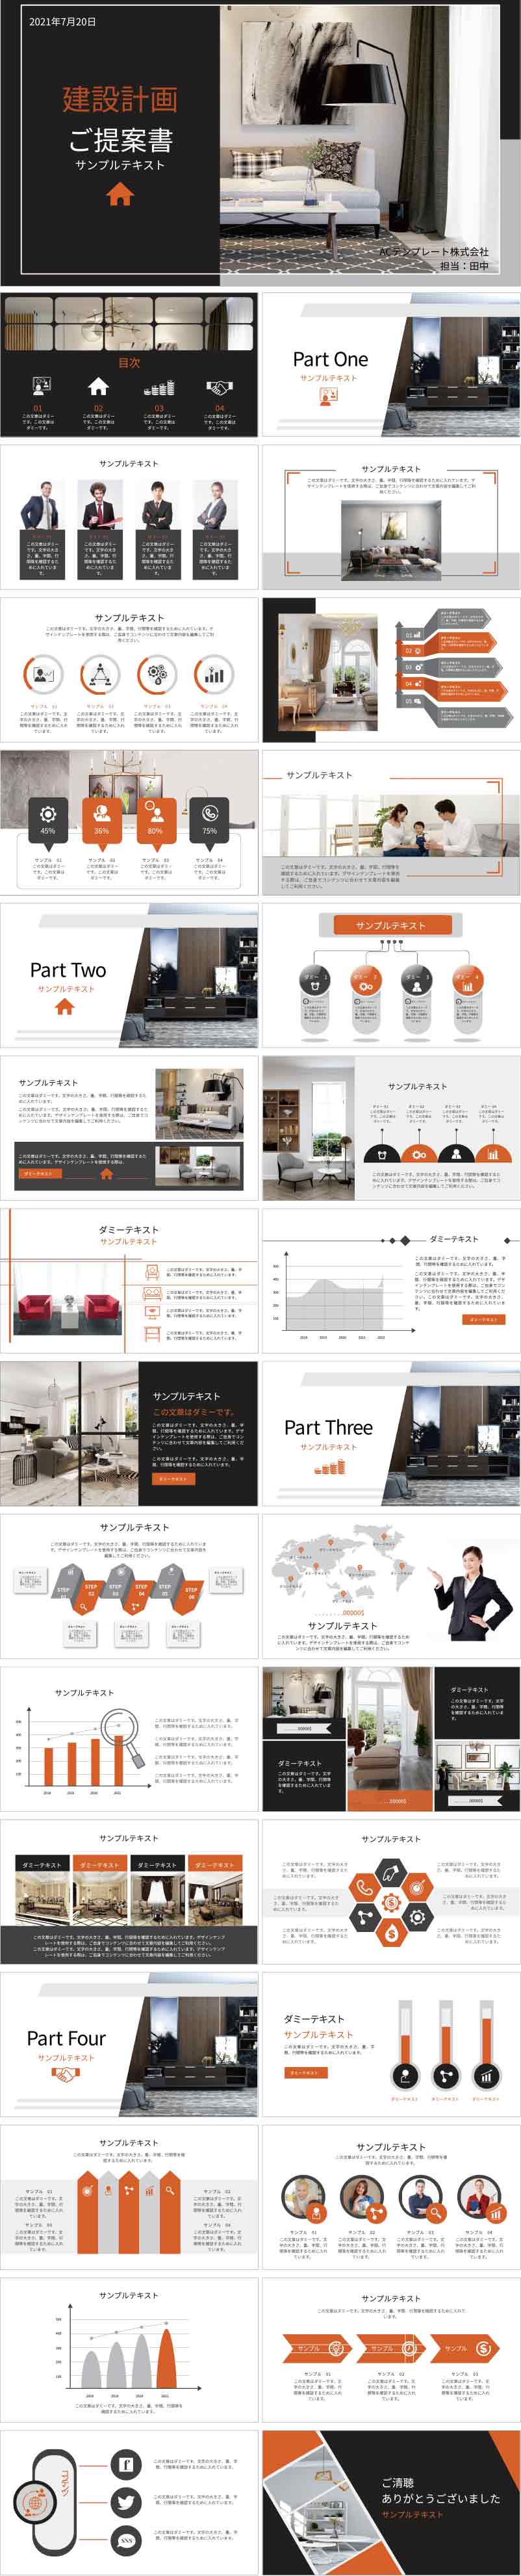 PowerPoint template vol.86